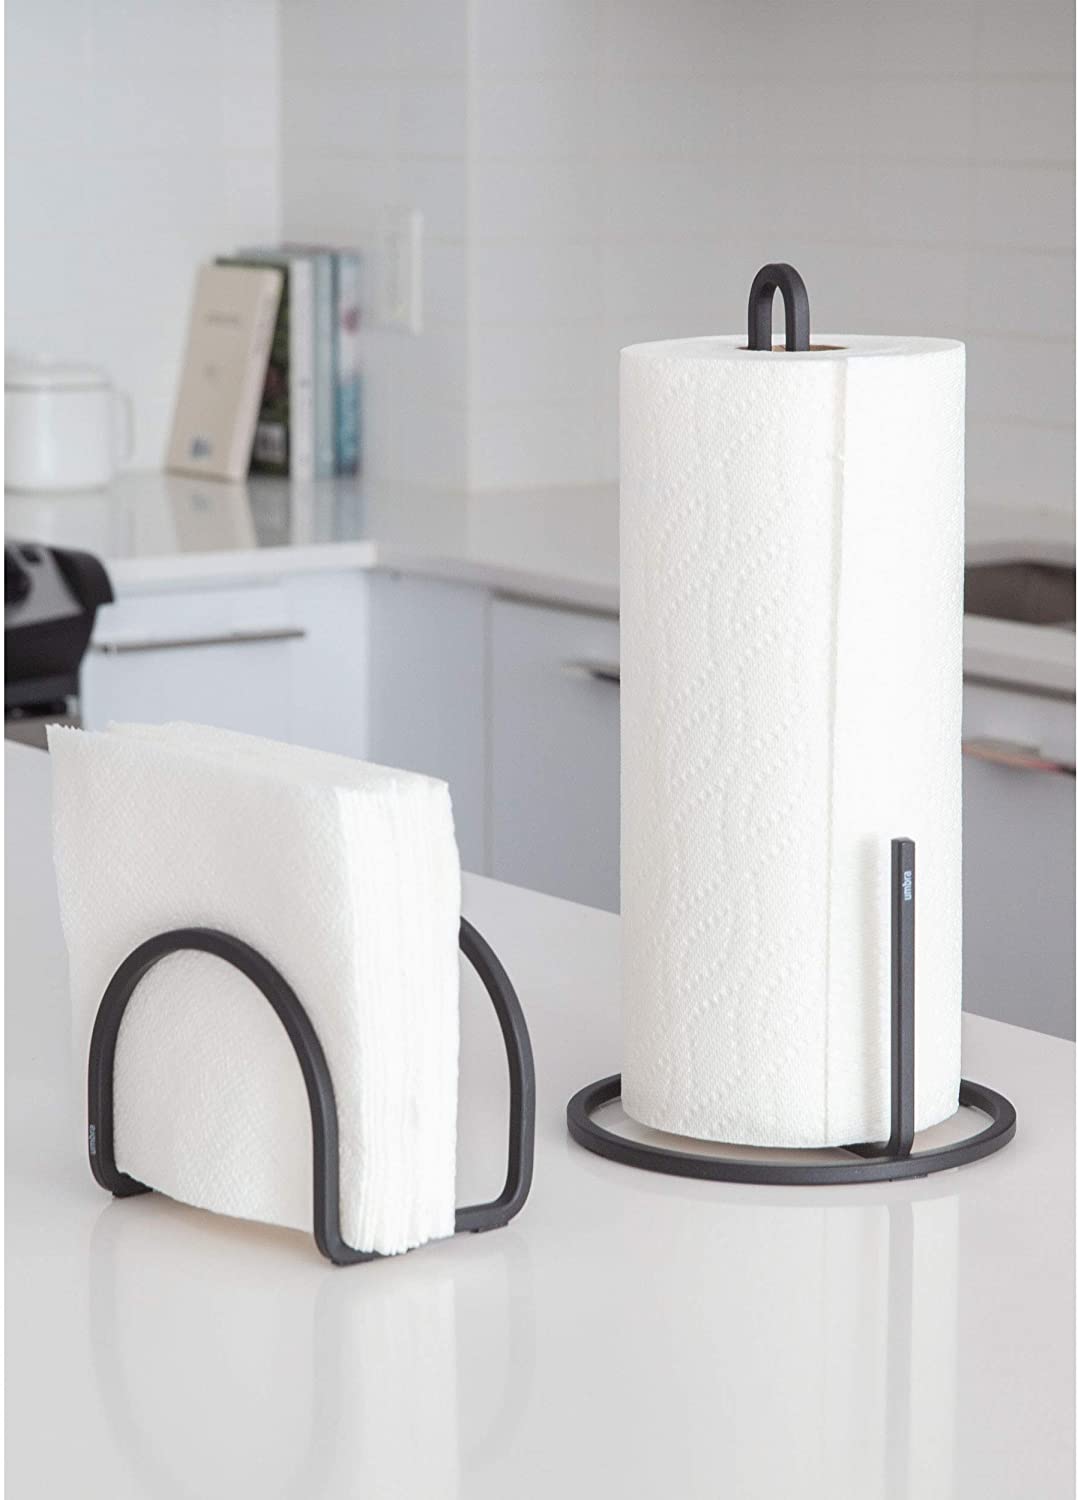 
Umbra Squire Stand-Up Paper Towel Holder with Bent Metal Wire Design and Black Finish for Kitchen or Bathroom 6